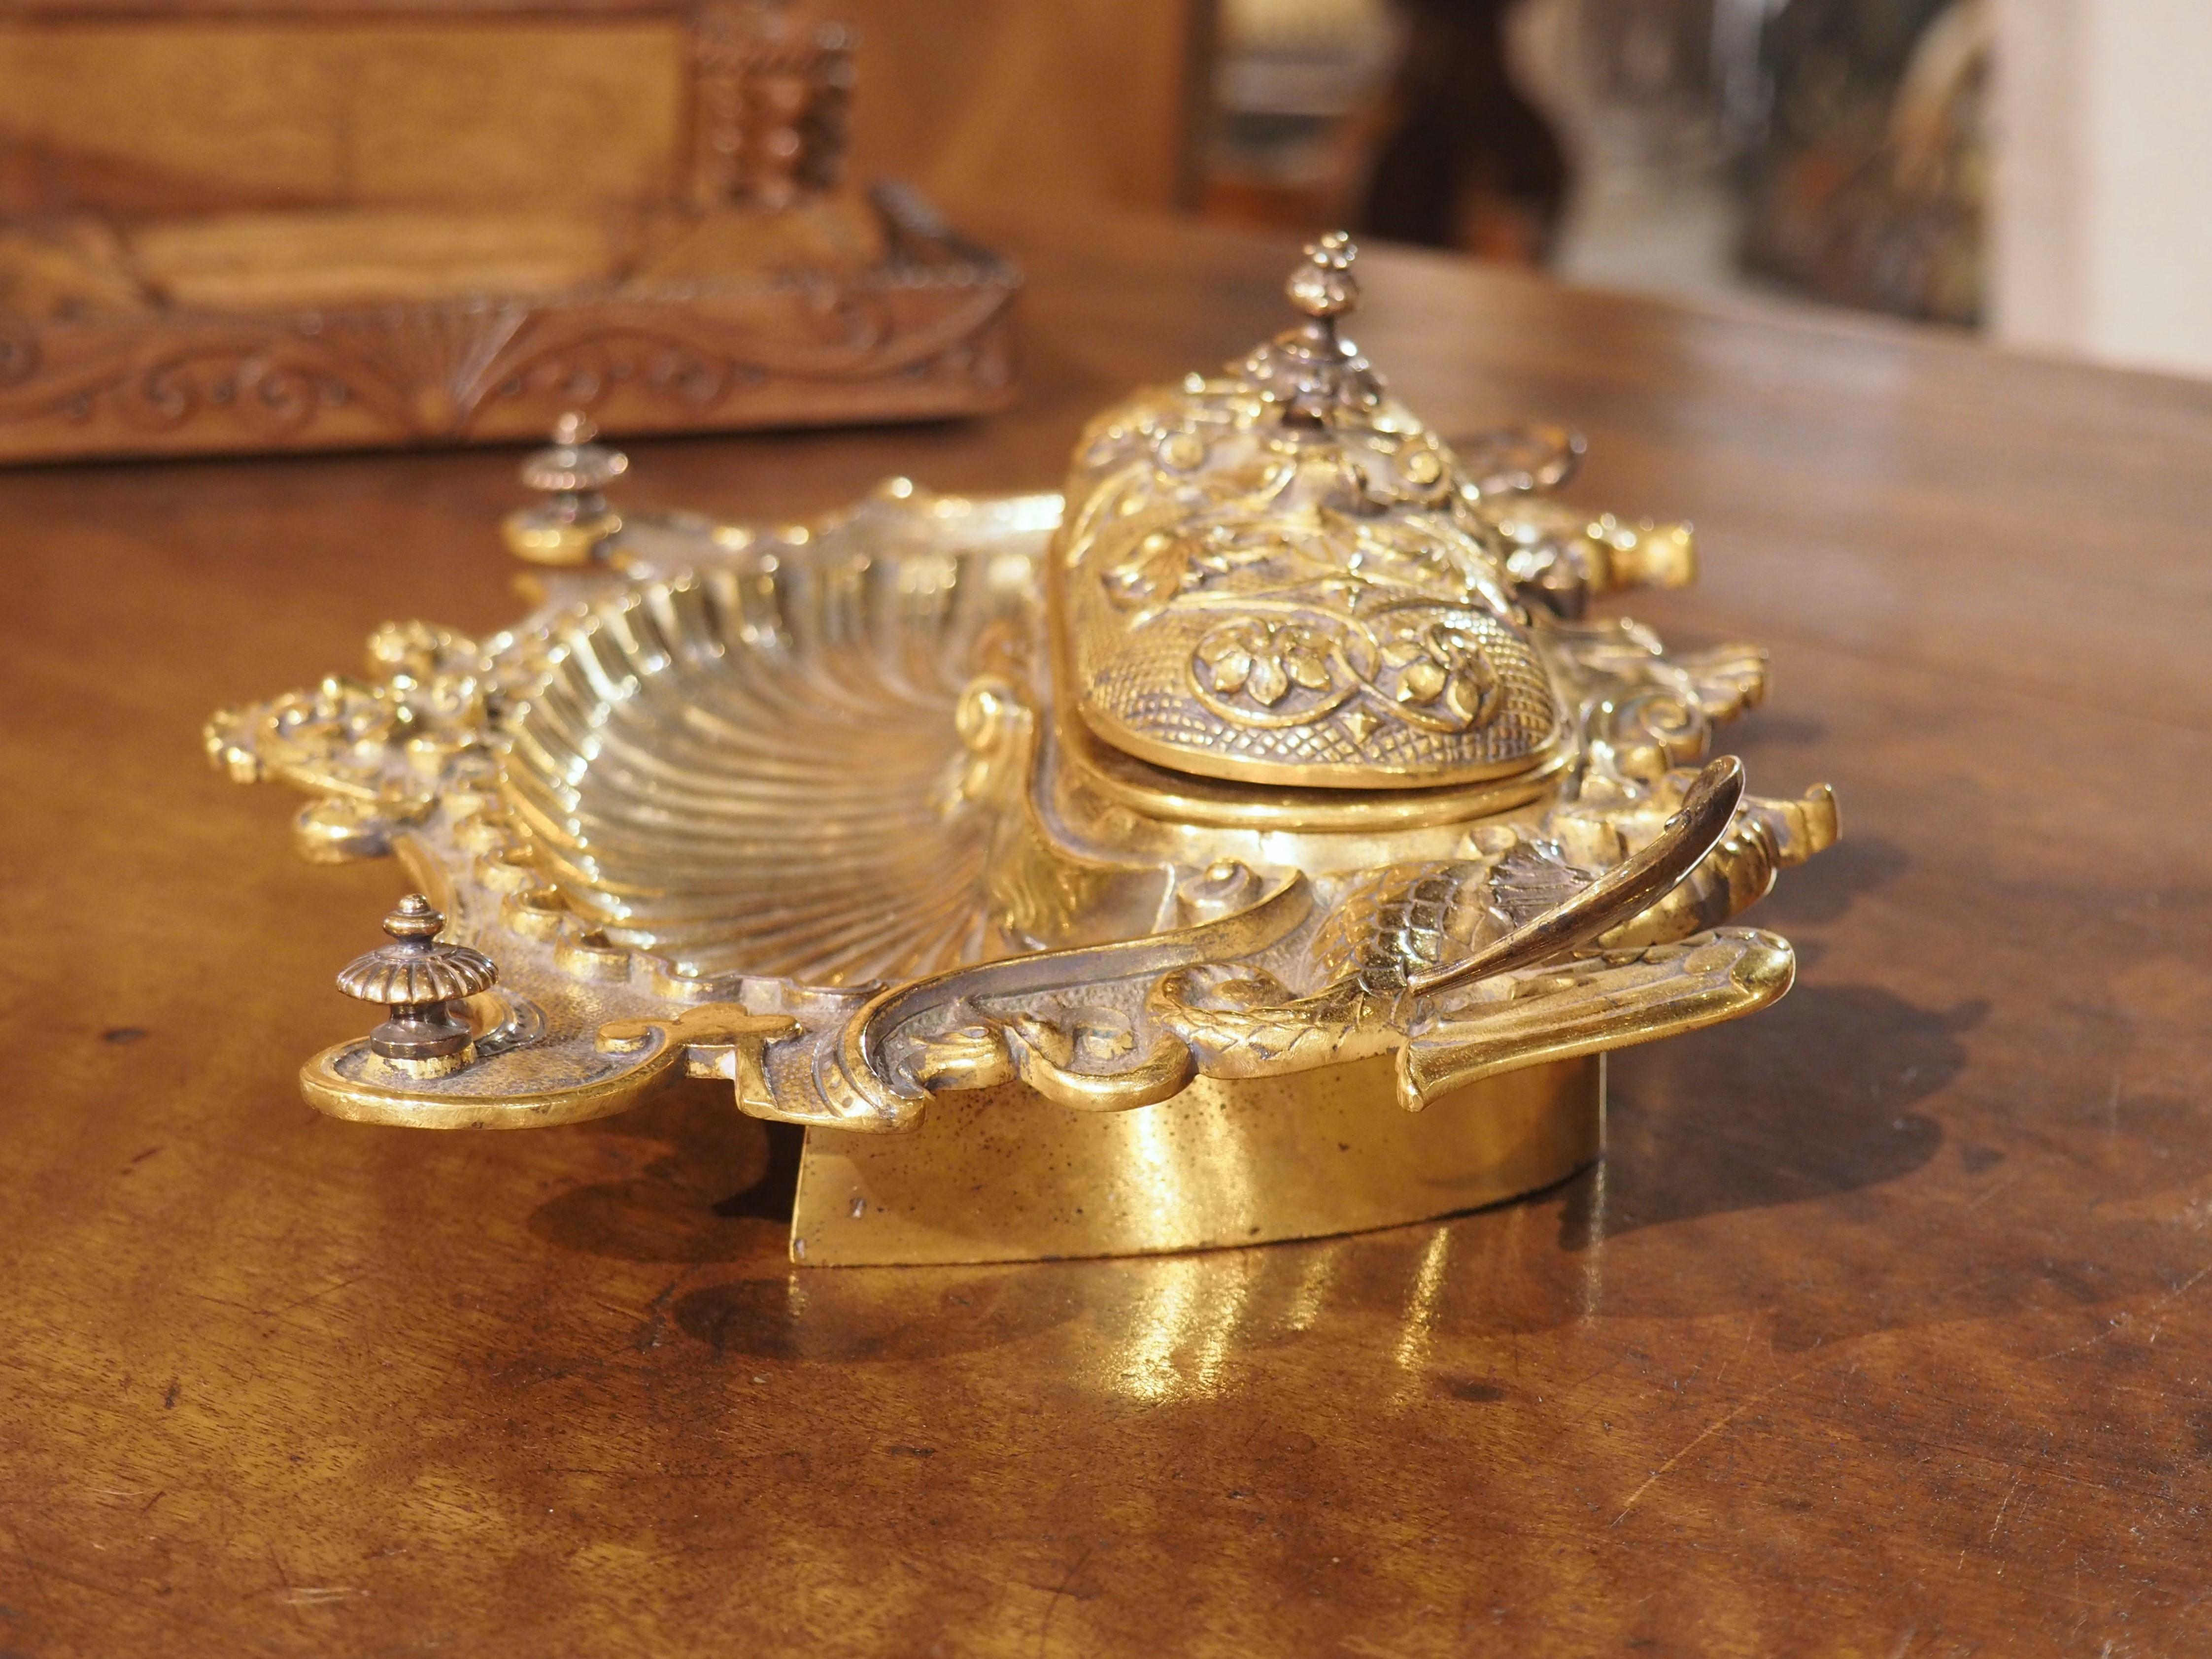 Napoleon III Gilt Bronze Inkwell from France, C. 1840 For Sale 5